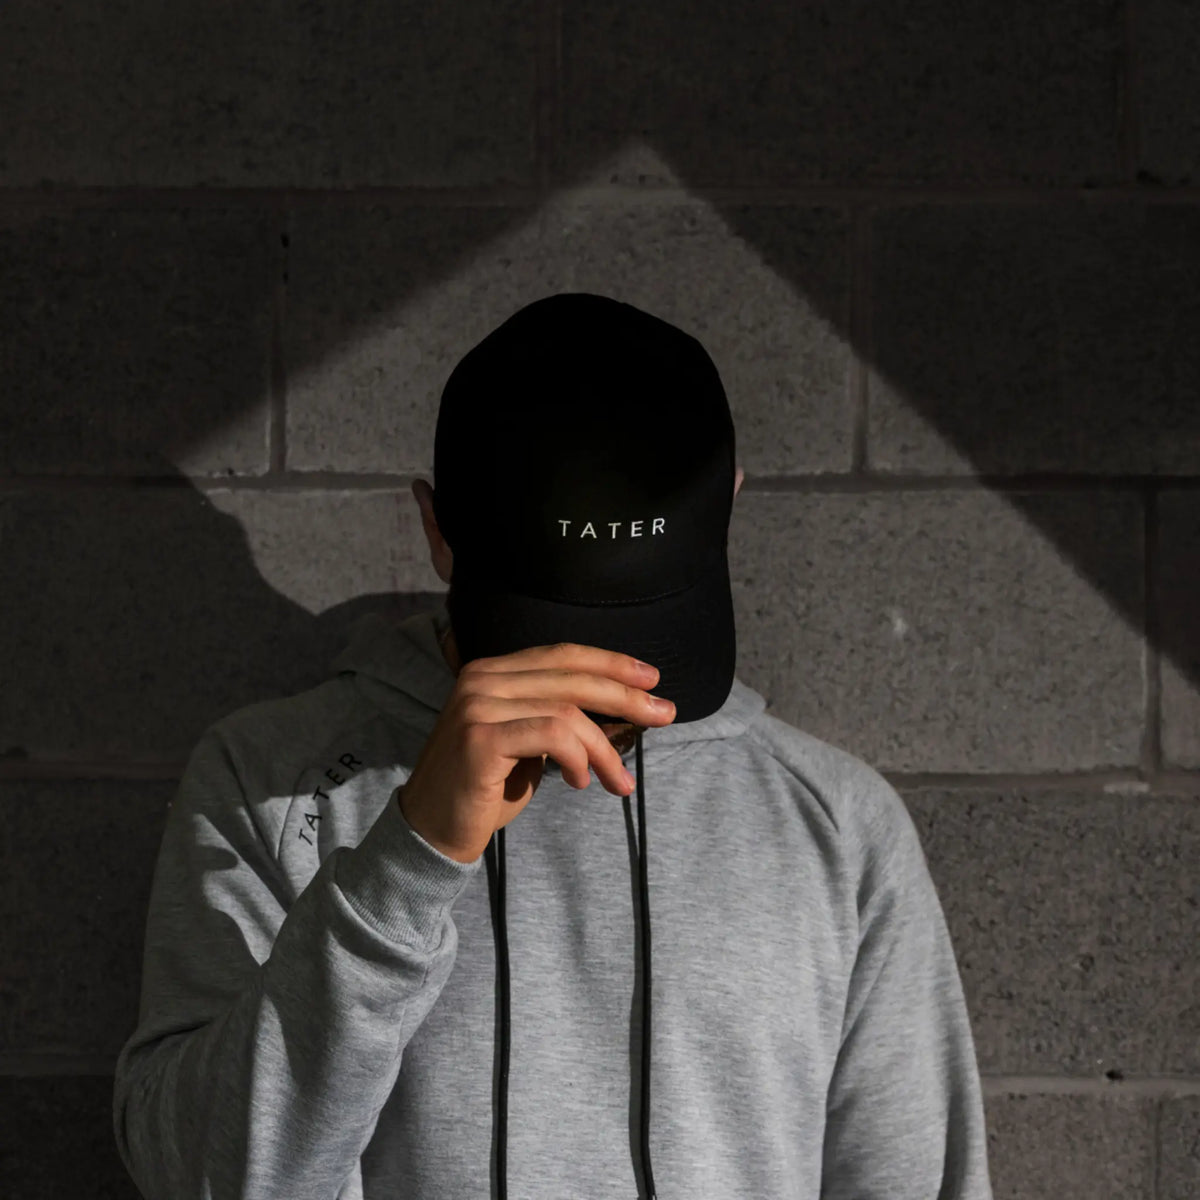 This image presents a person in a shadowy environment wearing a grey long-sleeve shirt and holding a black snapback cap with &quot;TATER&quot; embroidered in white across the front. The style is modern and minimalist, appealing to those who appreciate understated, sleek fashion. The cap is part of the Tater Baseball lifestyle collection, indicating a blend of sports and casual wear. The lighting and setting give the image an edgy, stylish vibe.